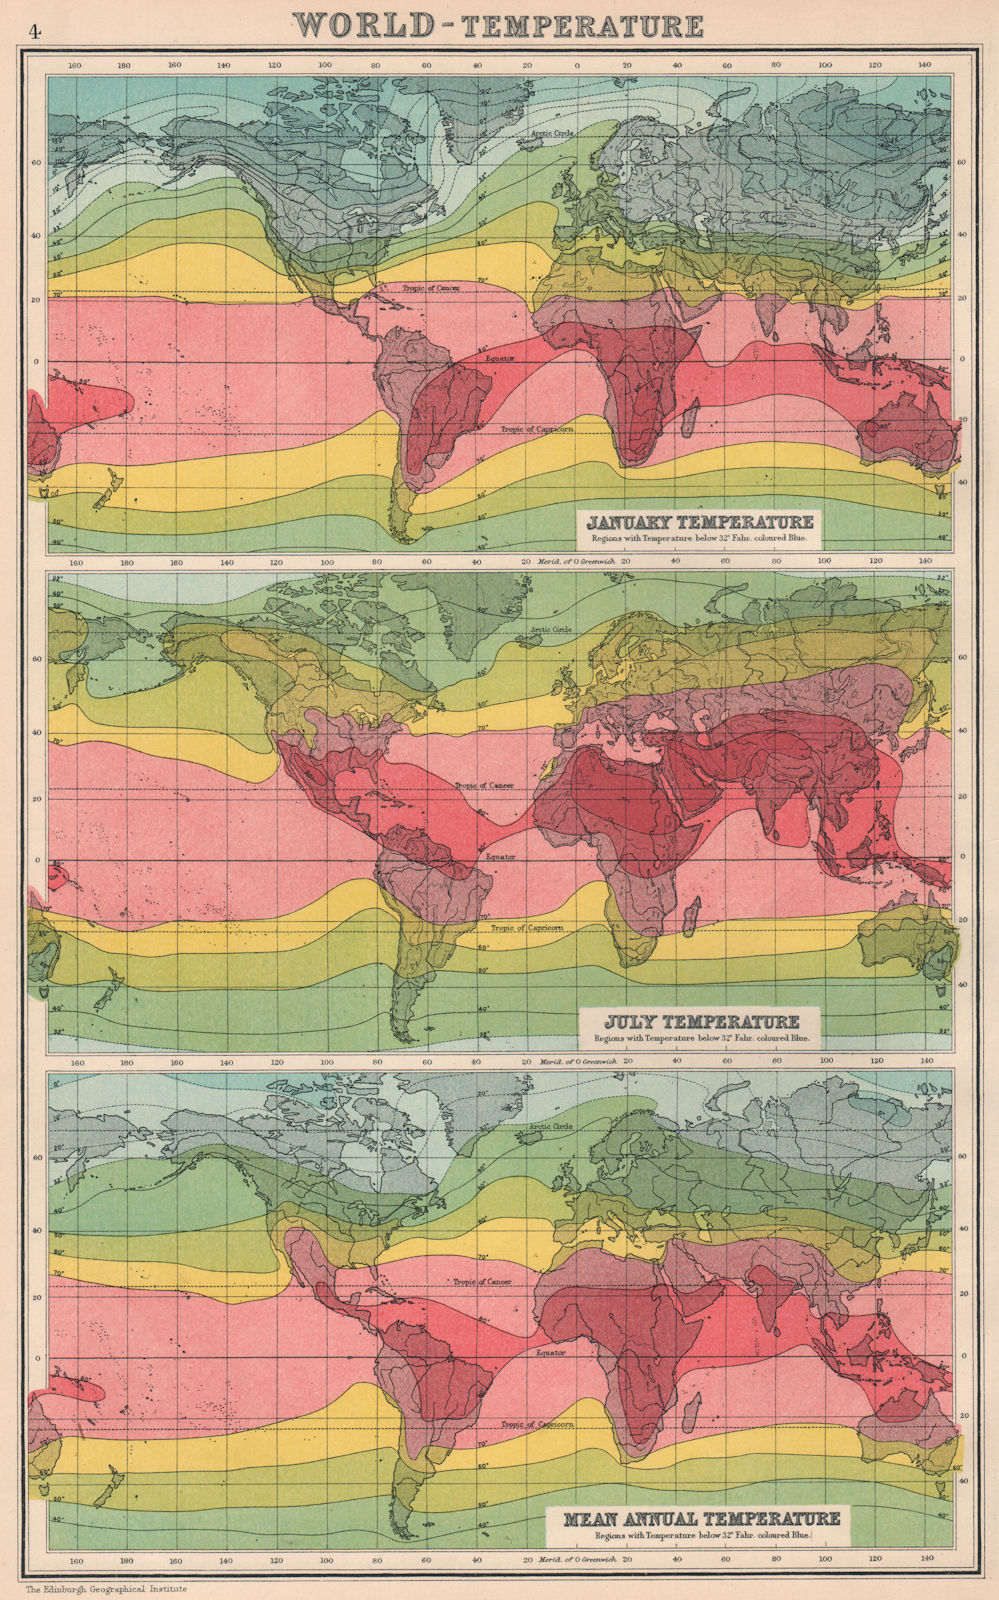 Associate Product WORLD-TEMPERATURE. January July & Mean Annual. BARTHOLOMEW 1924 old map